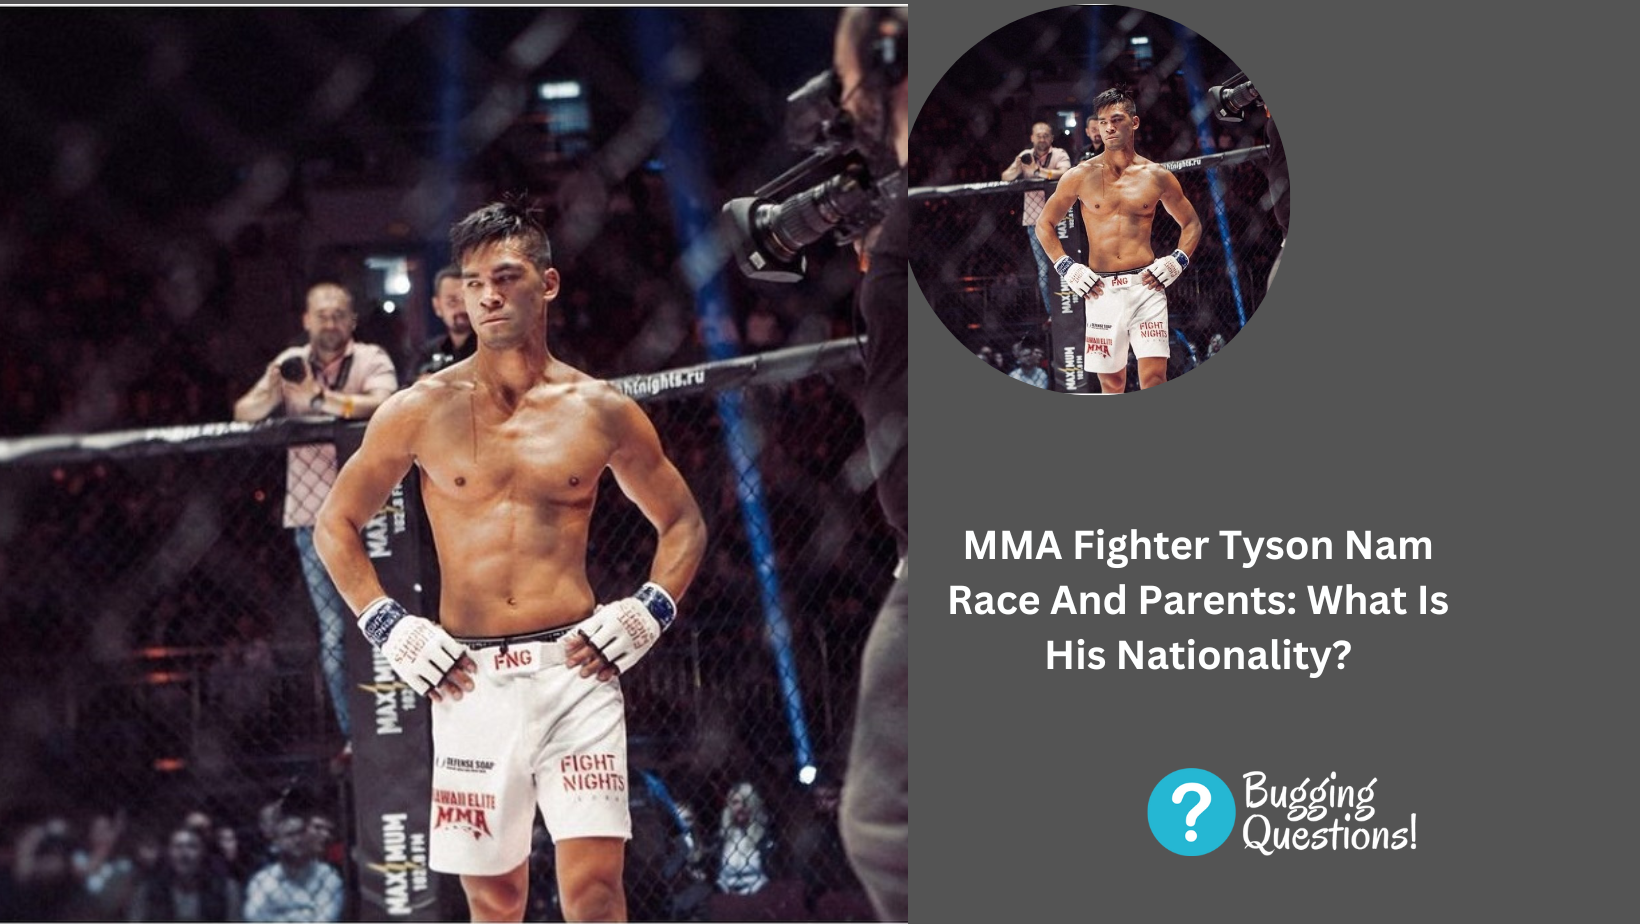 MMA Fighter Tyson Nam Race And Parents: What Is His Nationality?